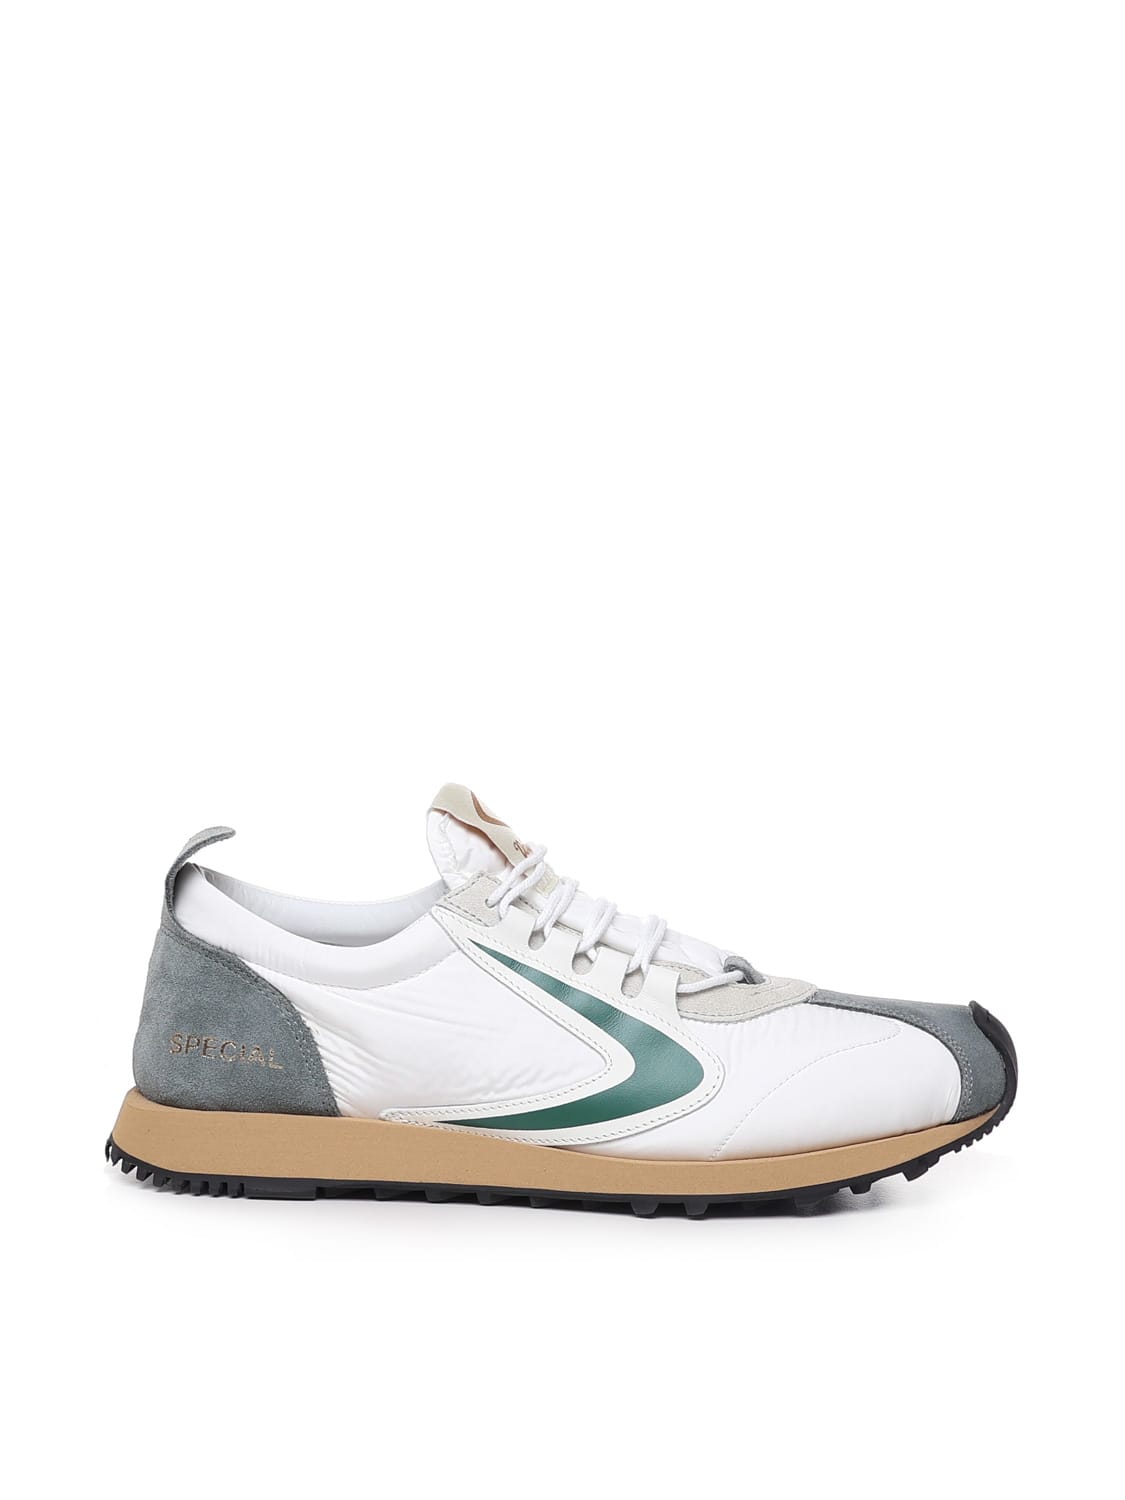 Valsport Special Nylon 03 Trainers In White, Grey, Green